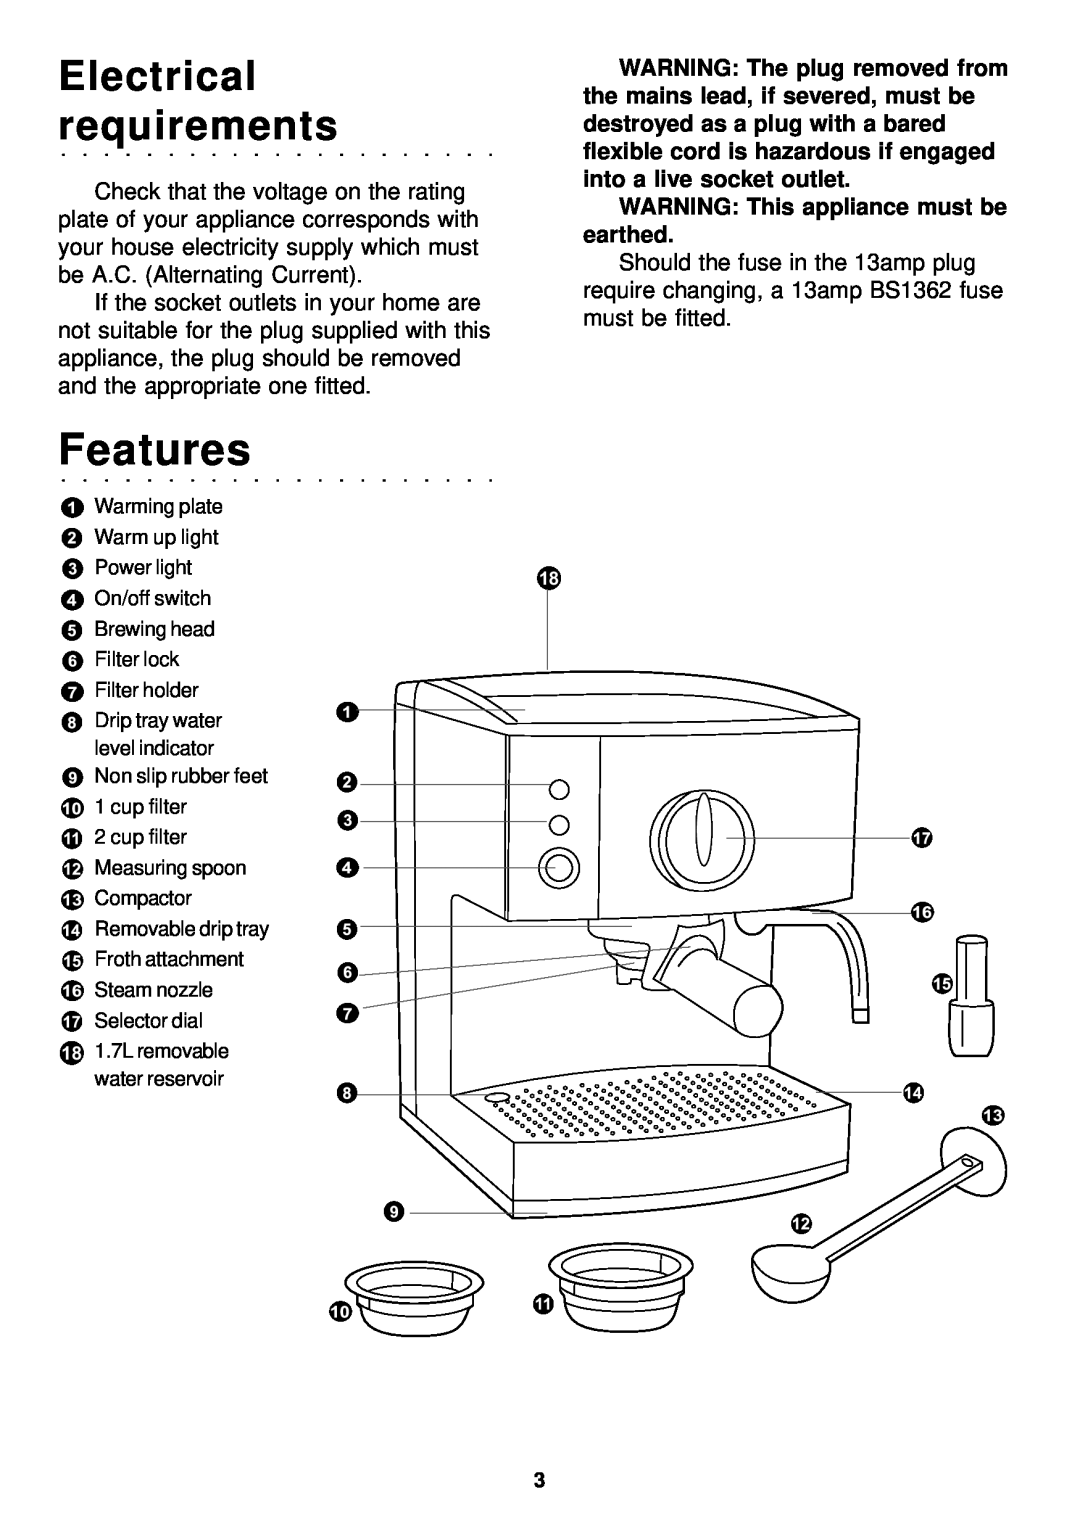 Morphy Richards espresso manual WARNING This appliance must be earthed, Features, Electrical requirements 